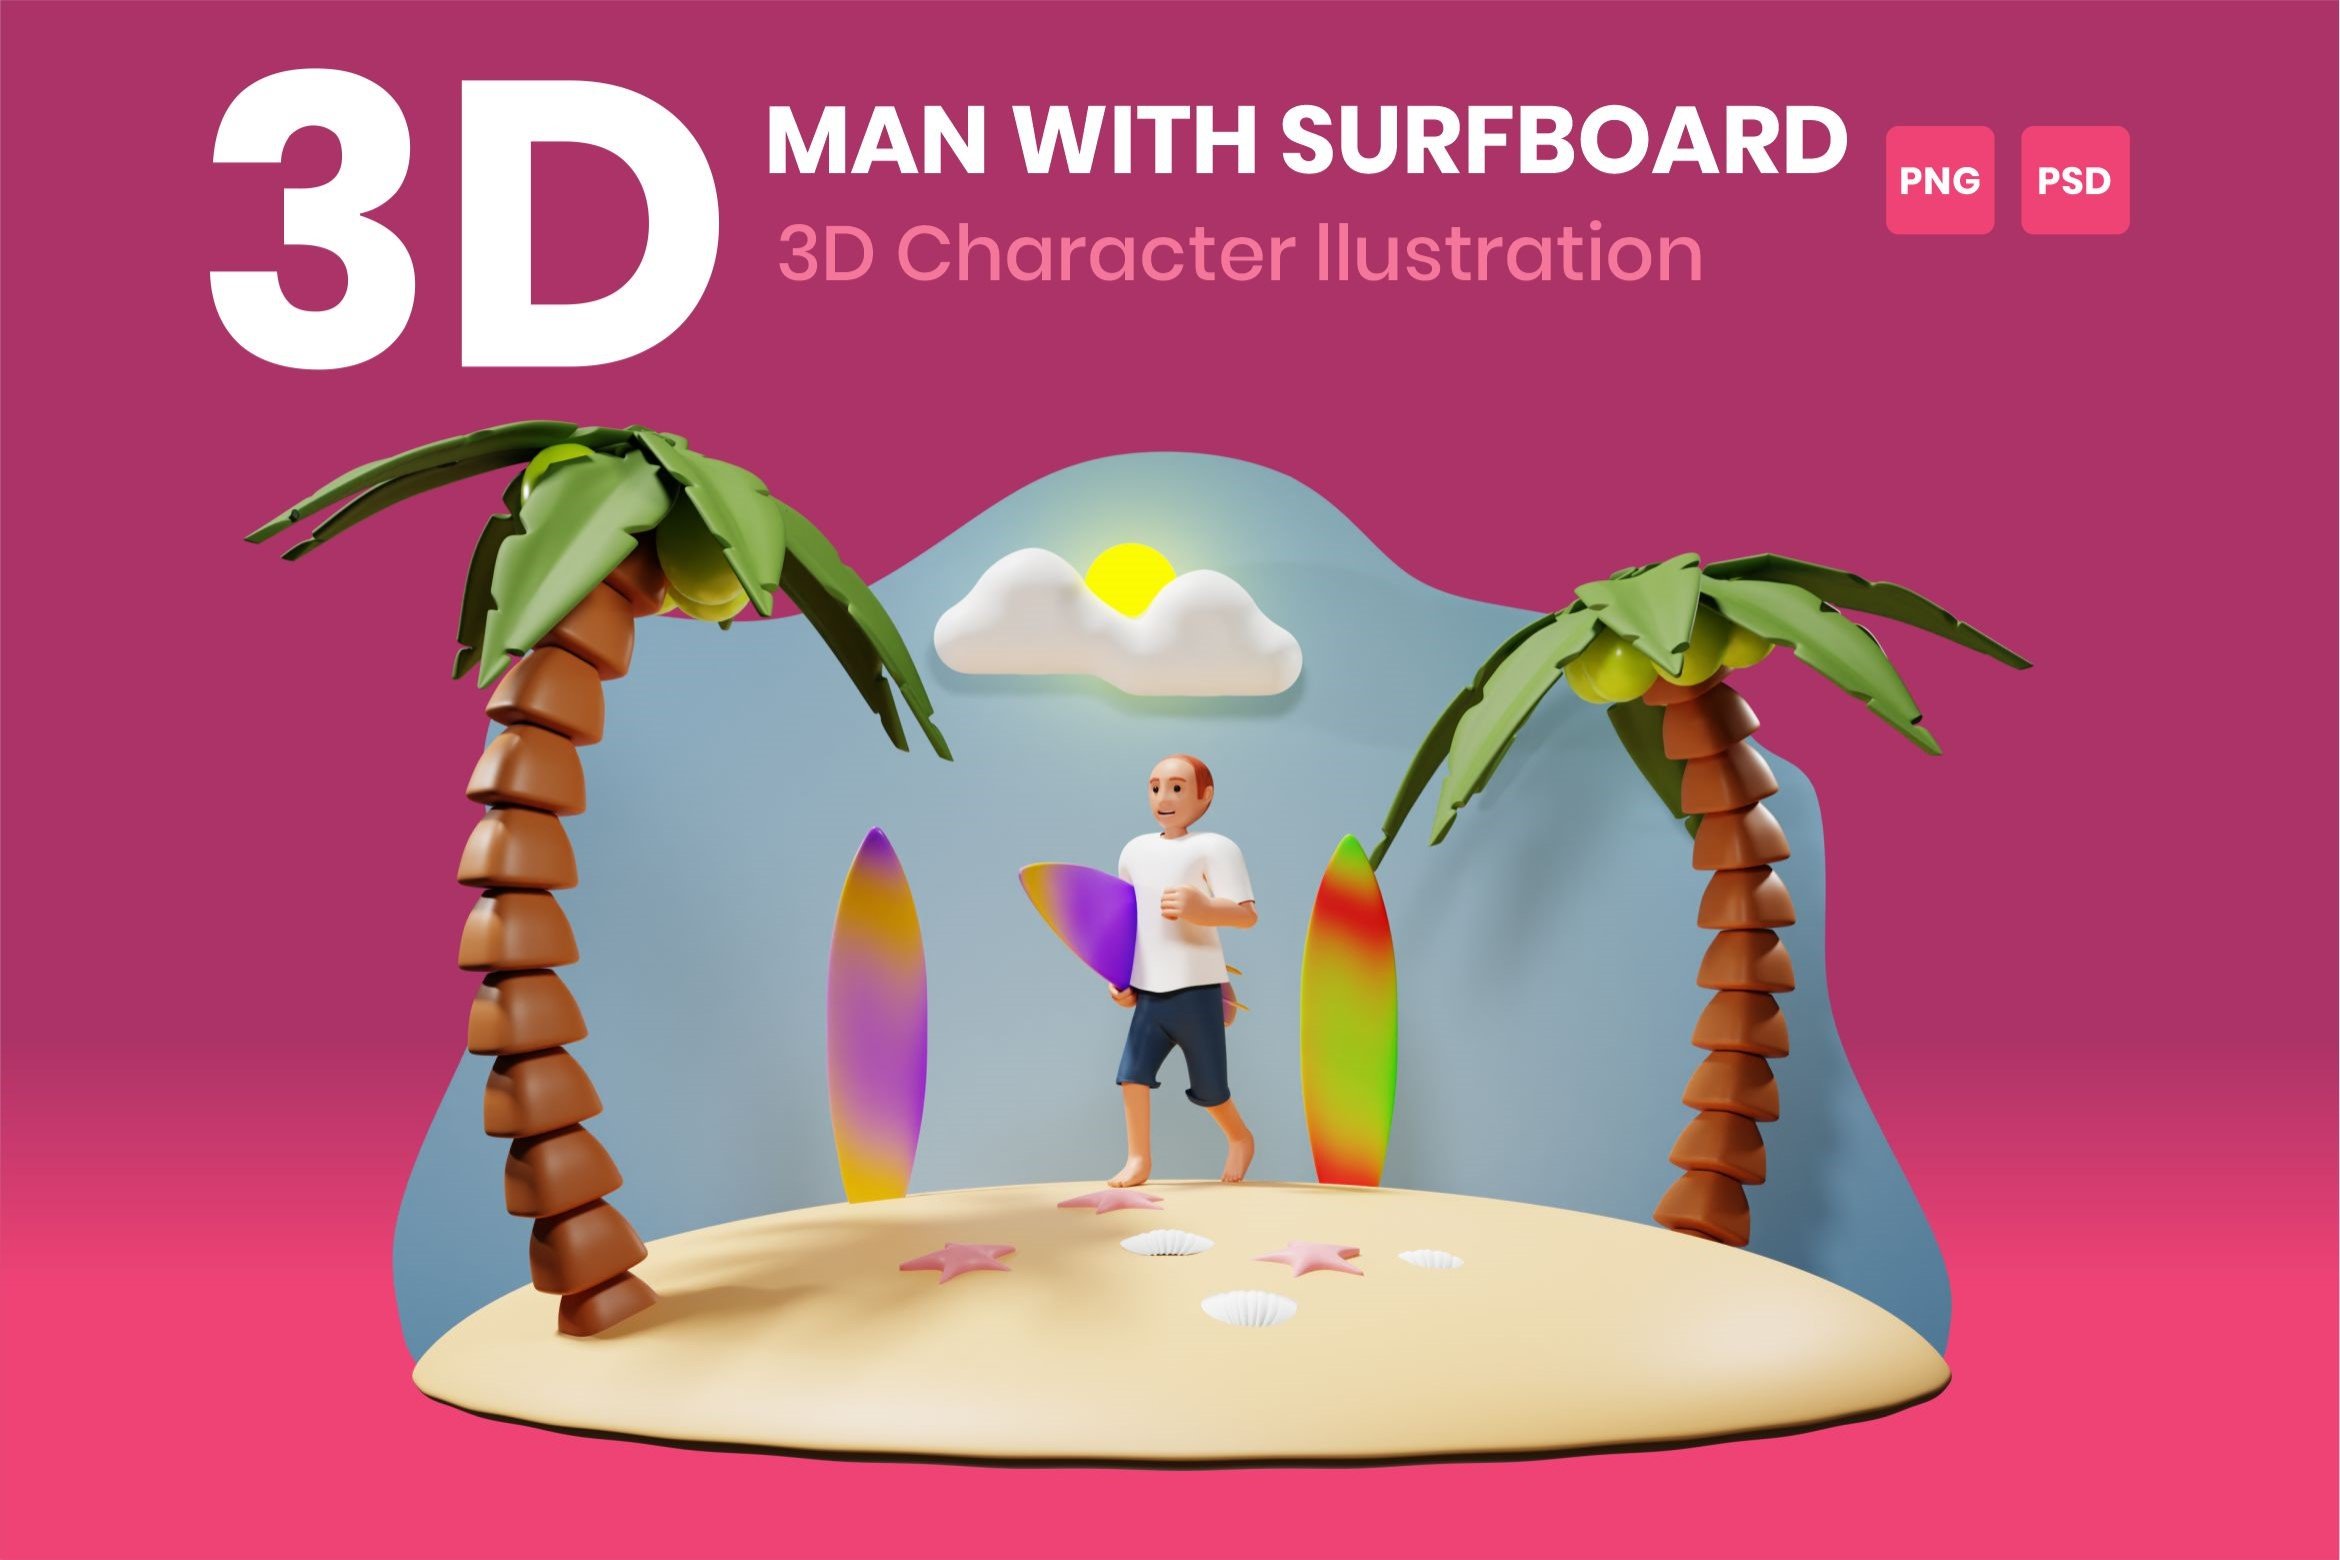 Man With Surfboard 3D Character cover image.